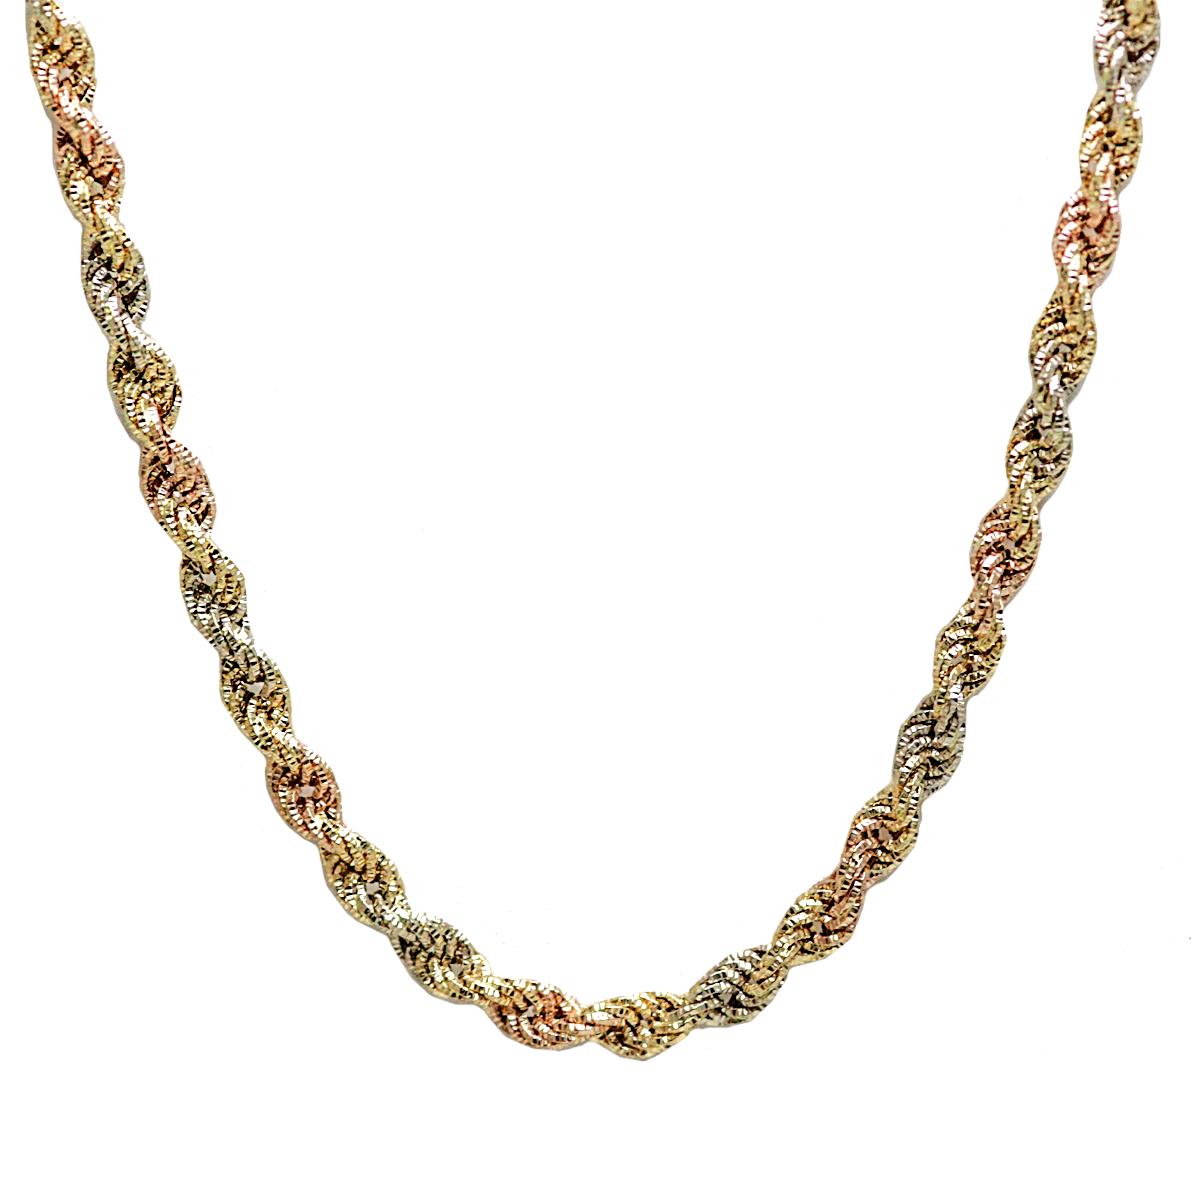 10K Gold Tricolor 7MM Textured DC Fancy Rope Necklace